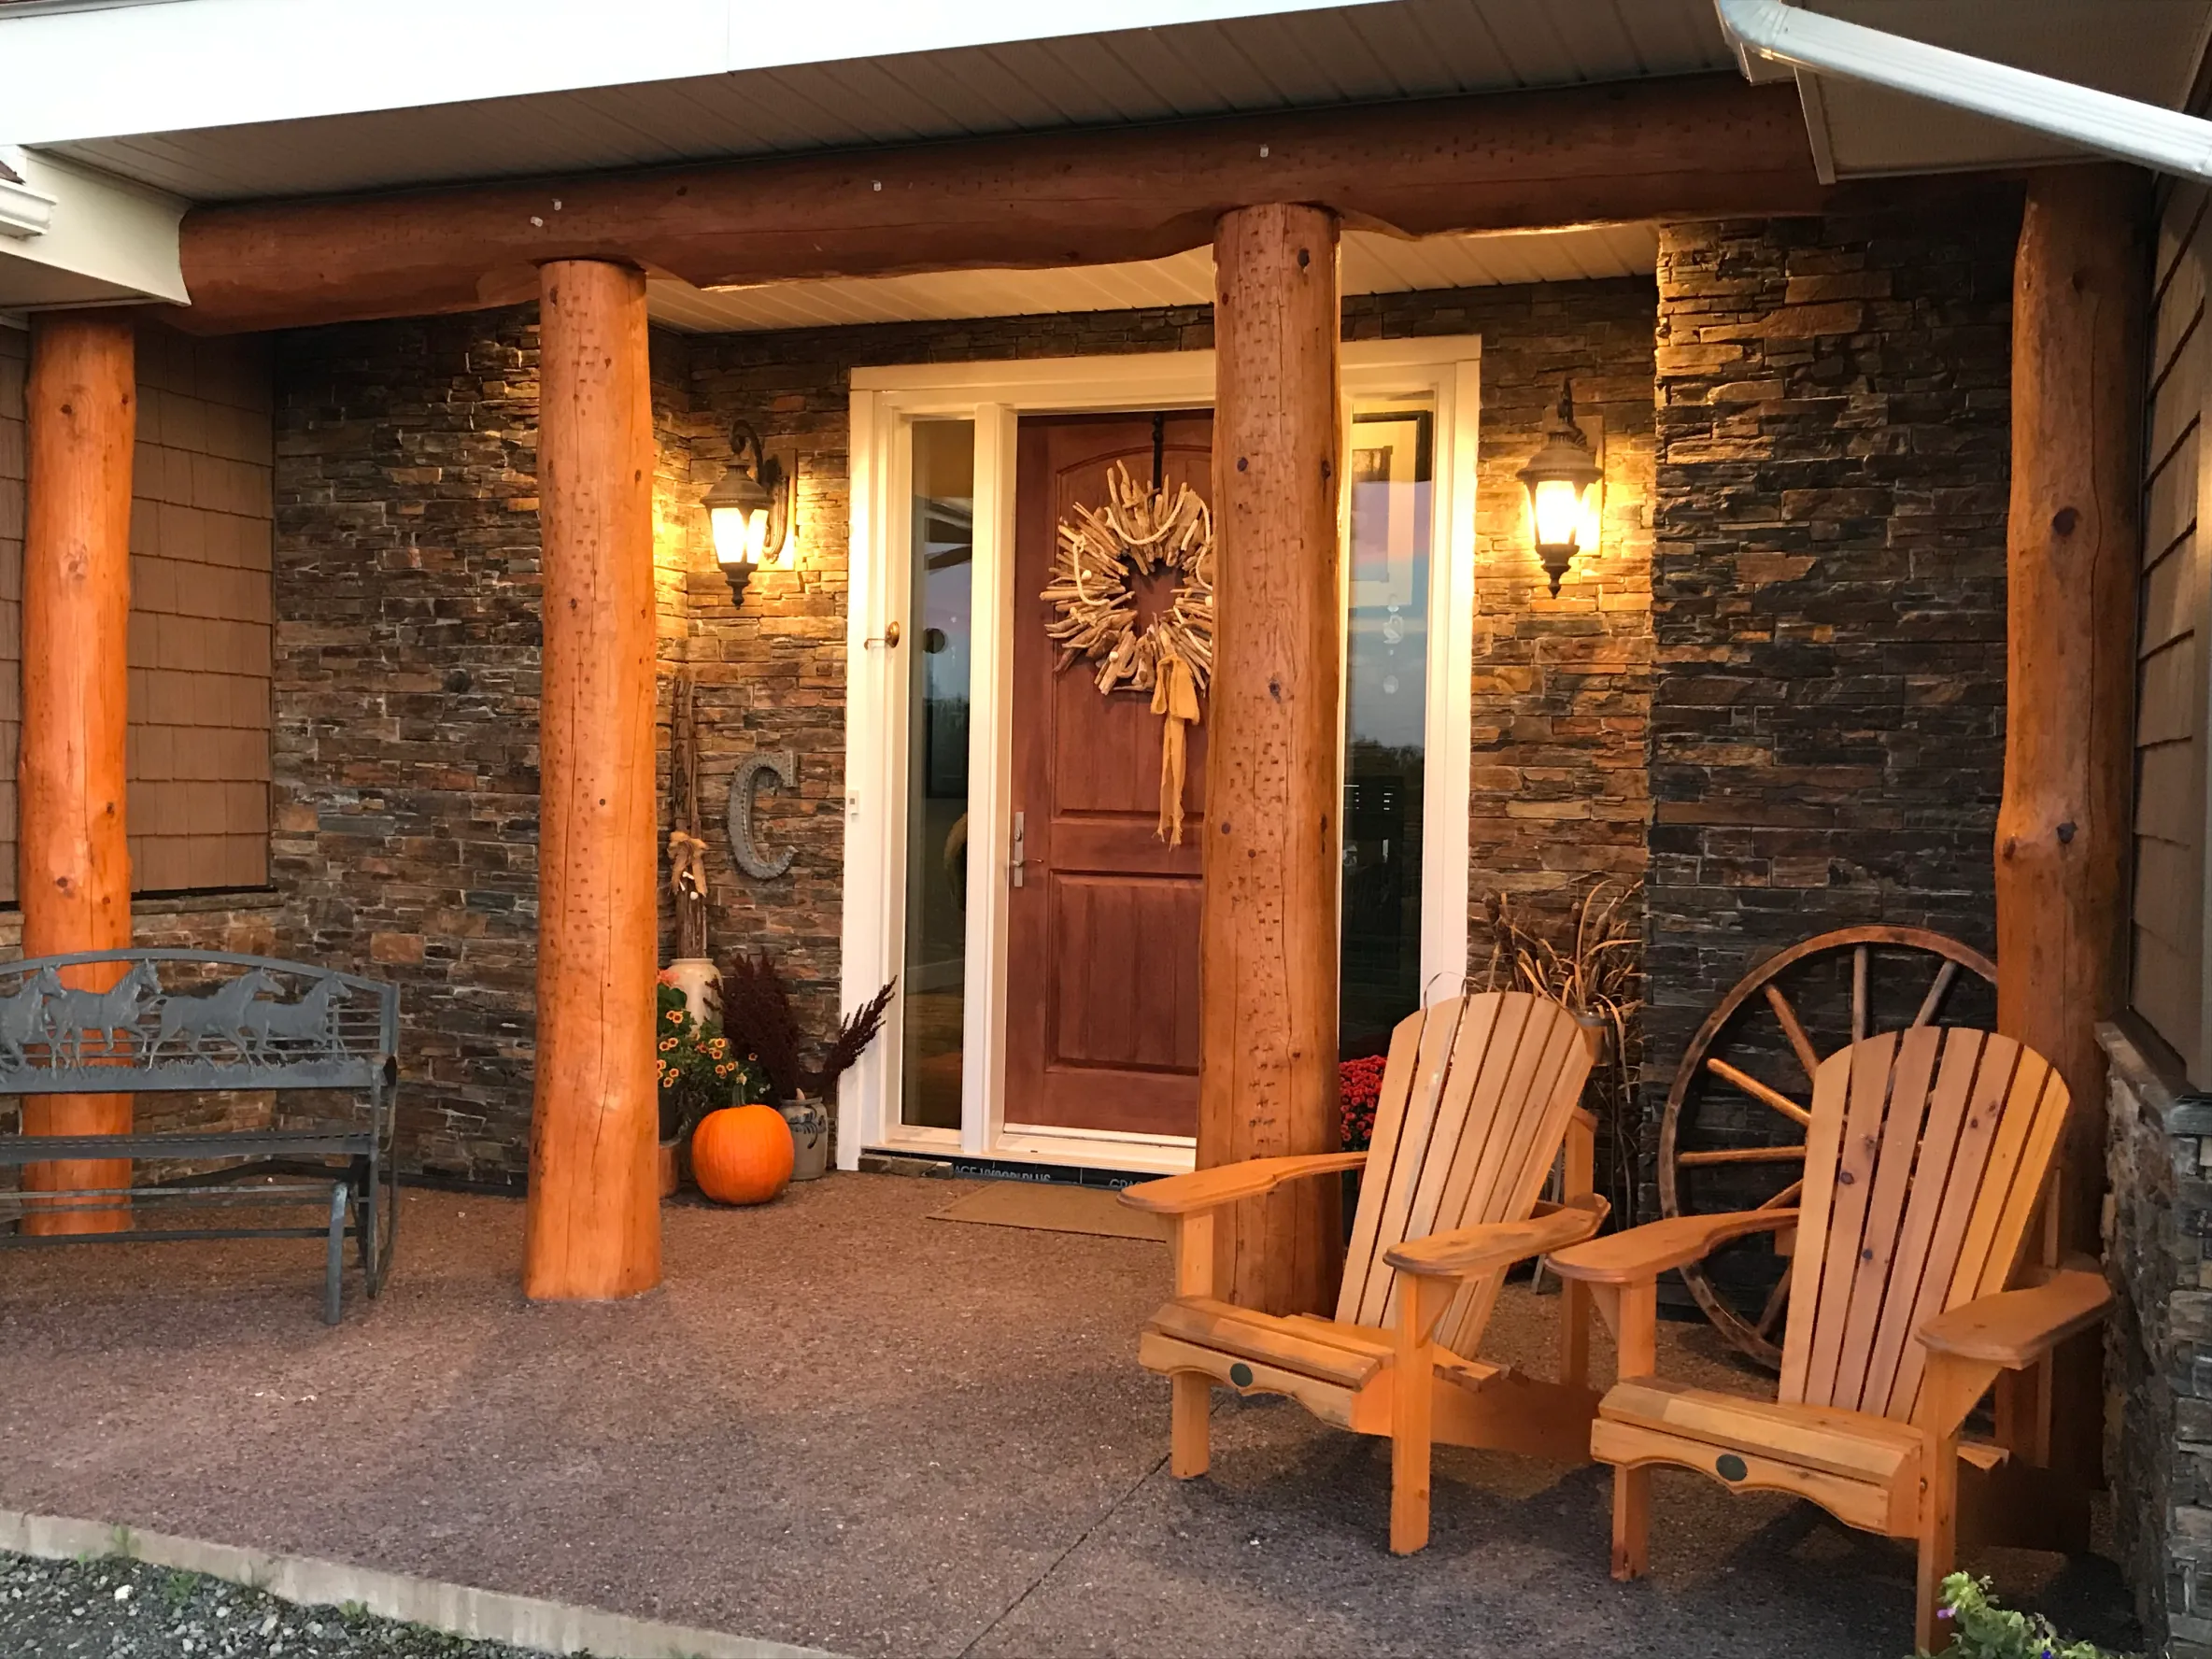 The porch of a wood and brick home in Nova Scotia with Muskoka Chairs